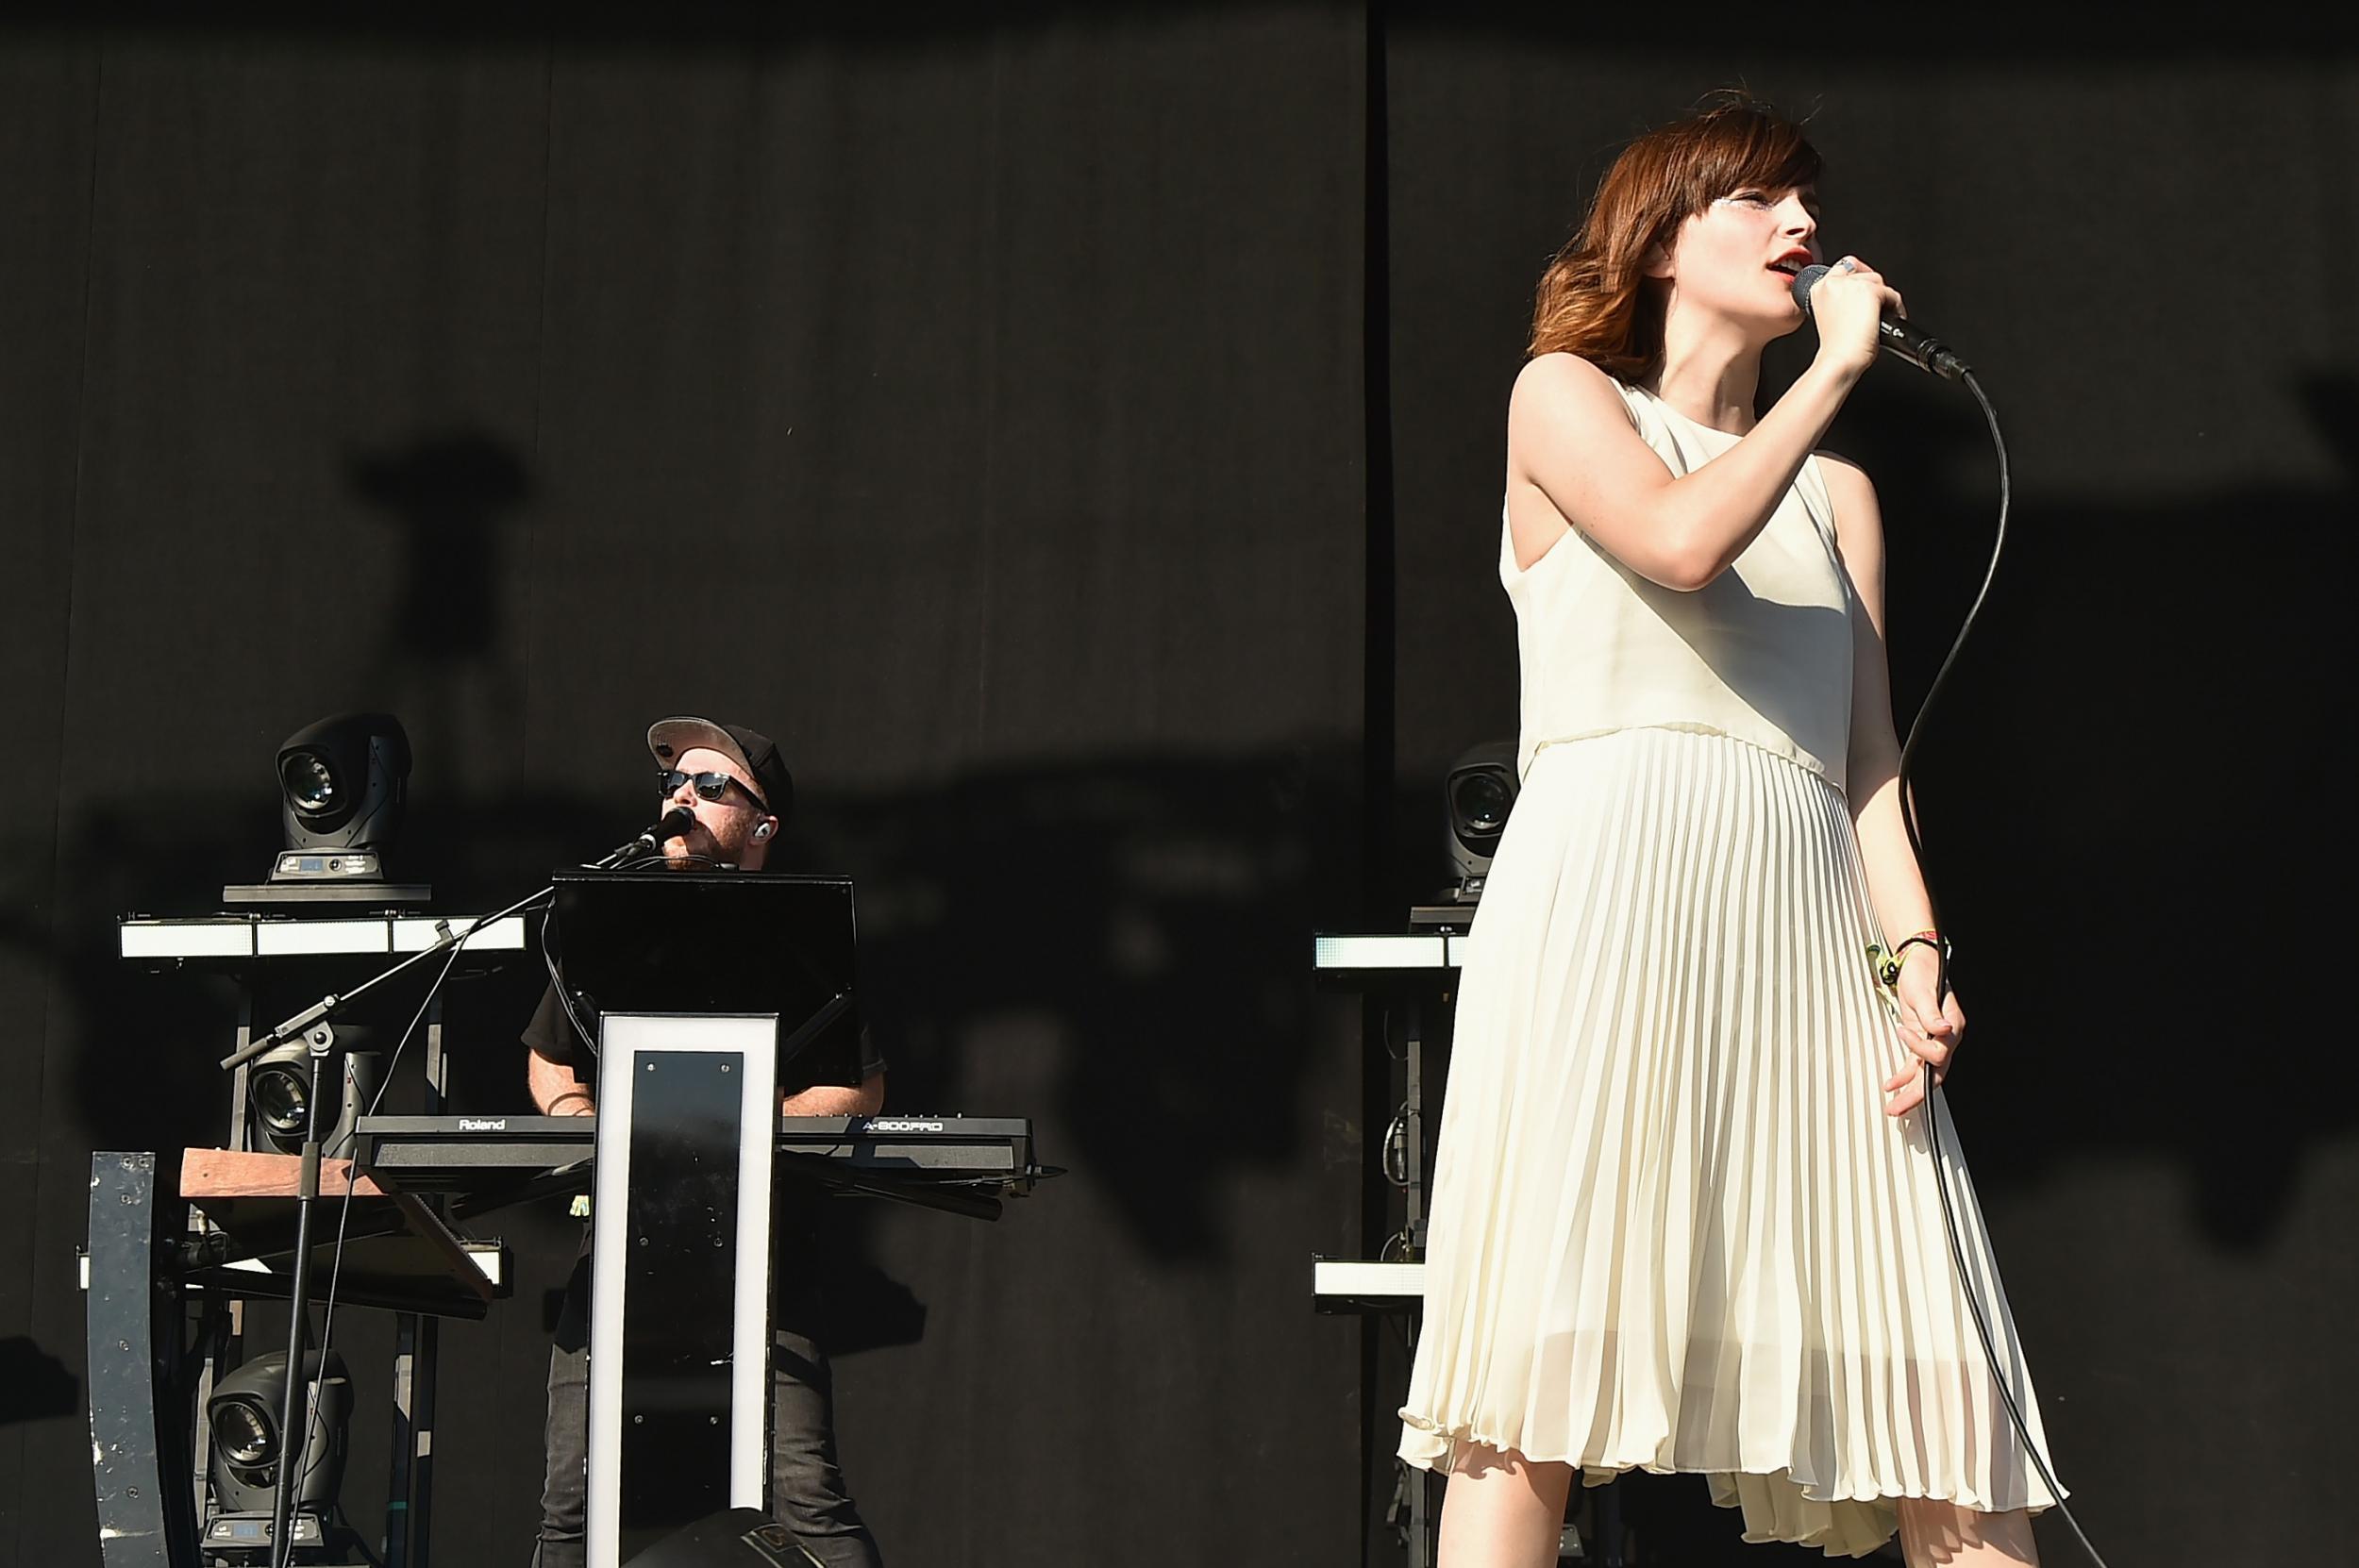 Recording artist Lauren Mayberry (L) and Martin Doherty of Chvrches performs onstage at Firefly Music Festival on June 18, 2016 in Dover, Delaware. Credit: Theo Wargo/Getty Images for Firefly.